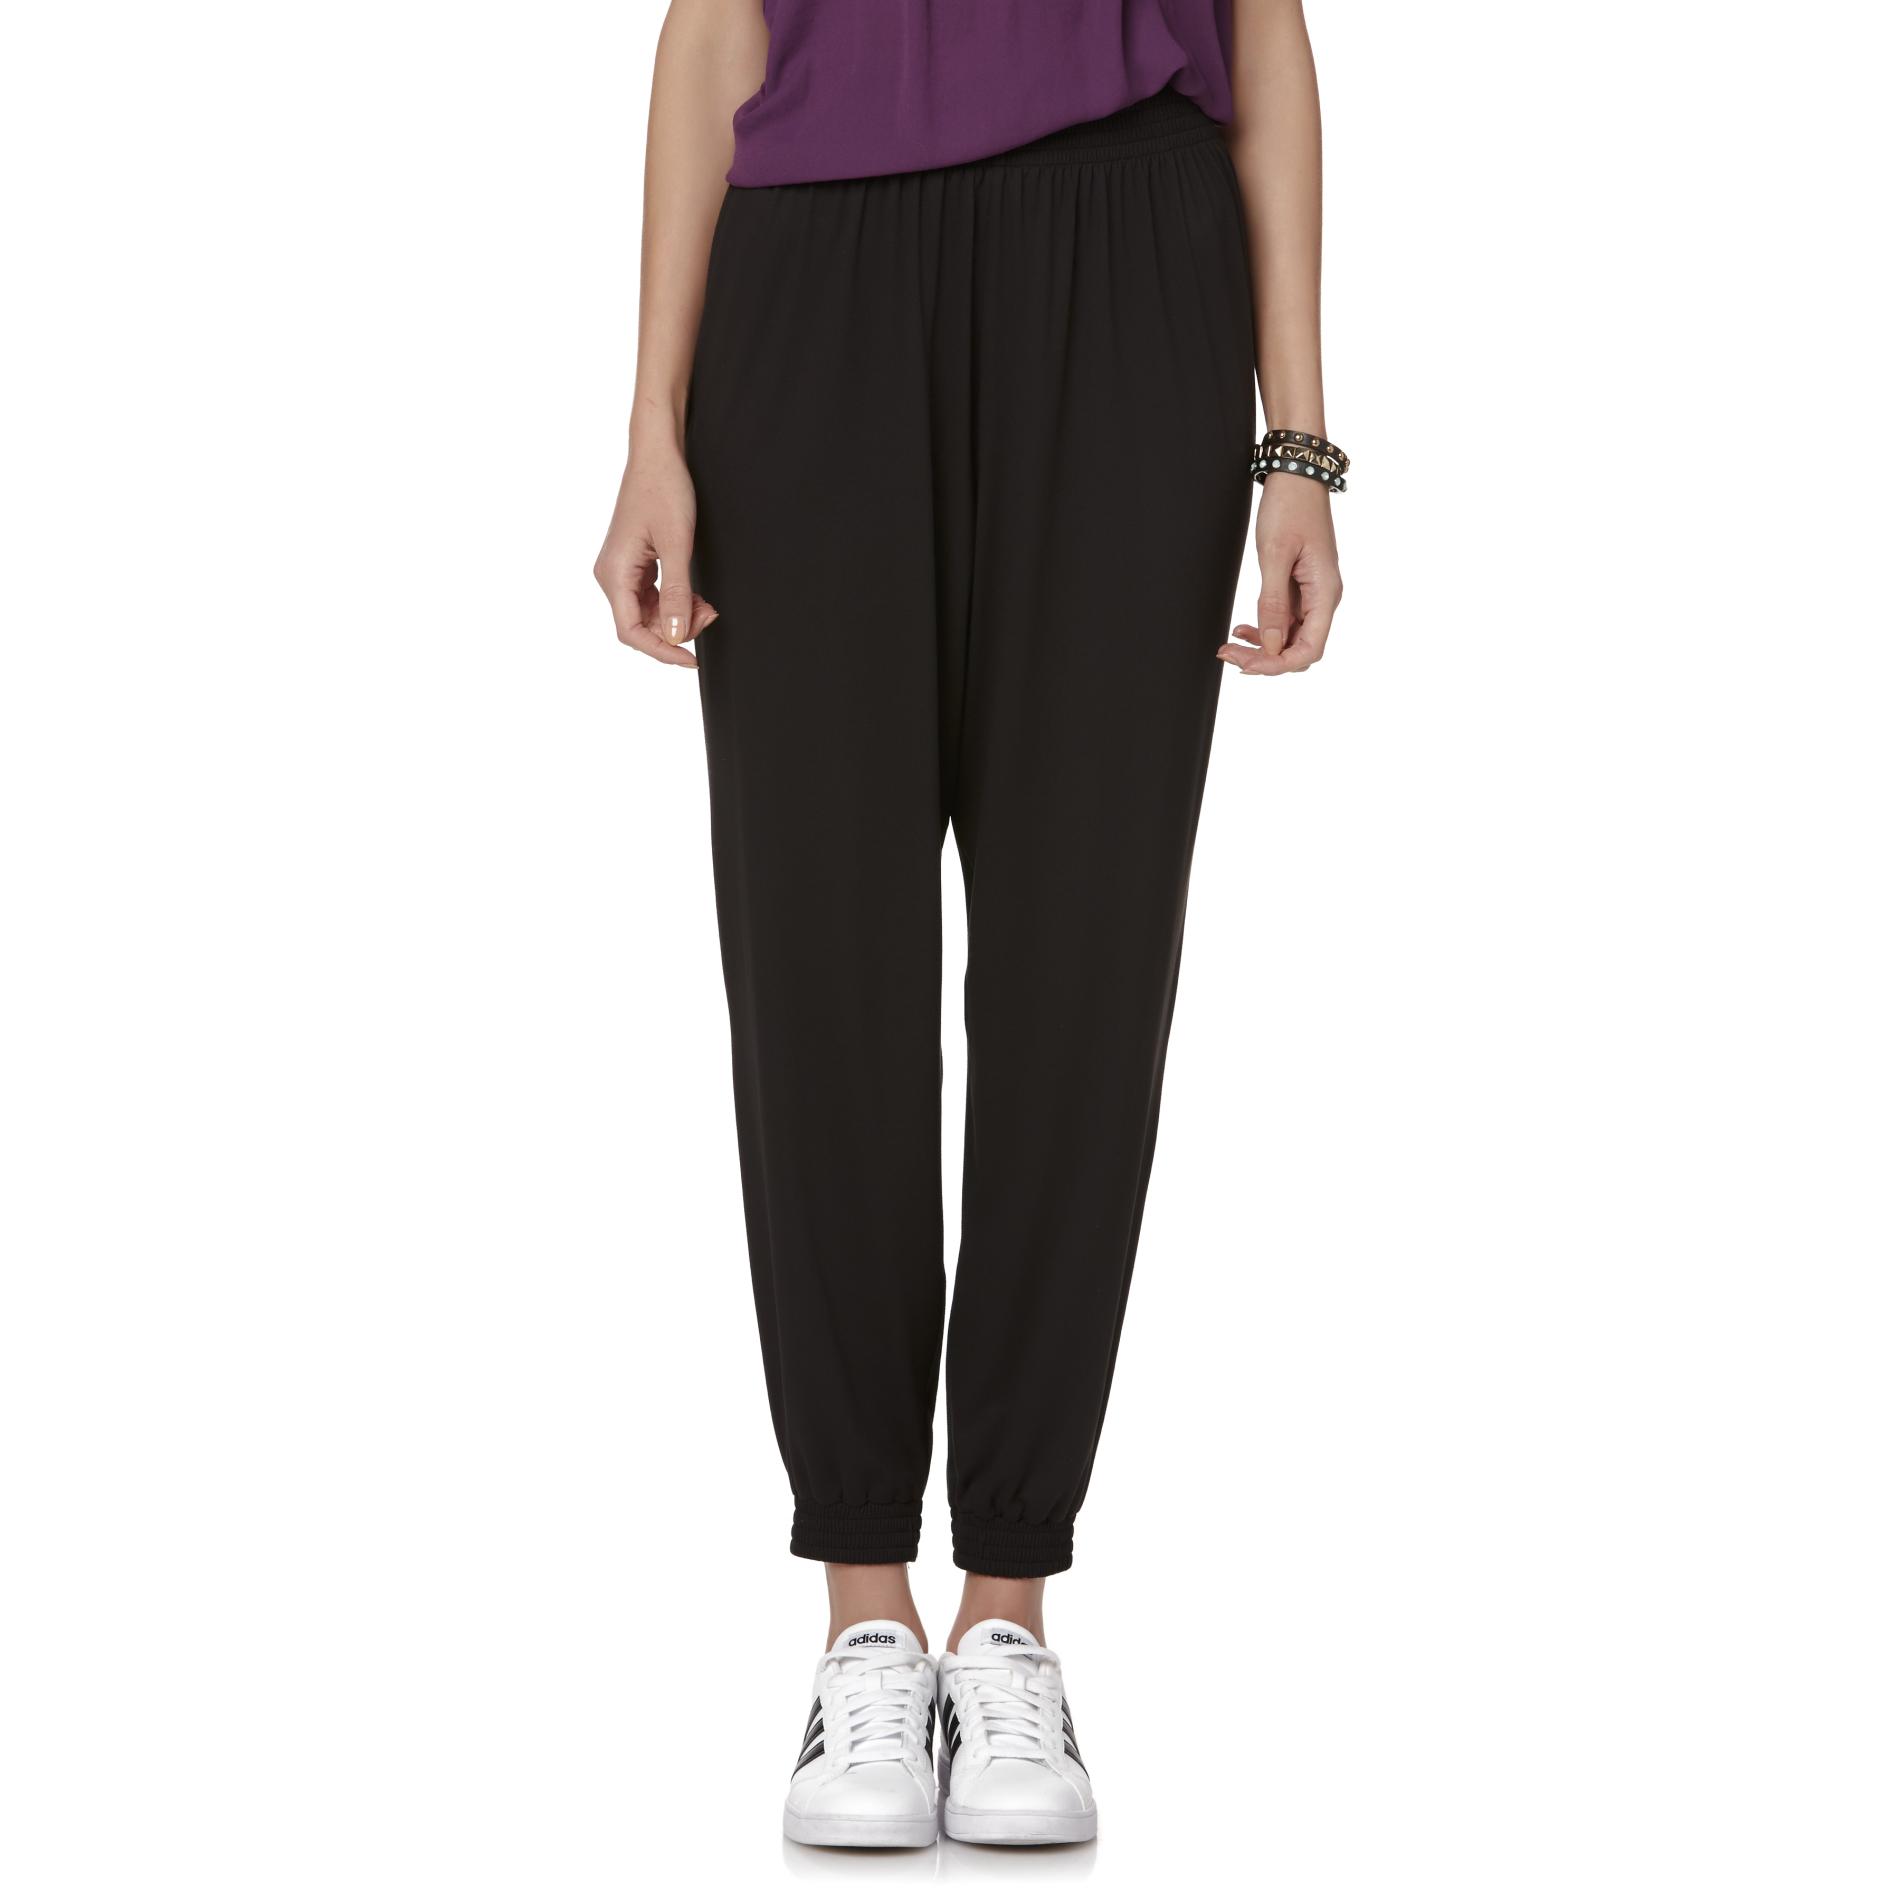 Simply Styled Women's Jogger Pants